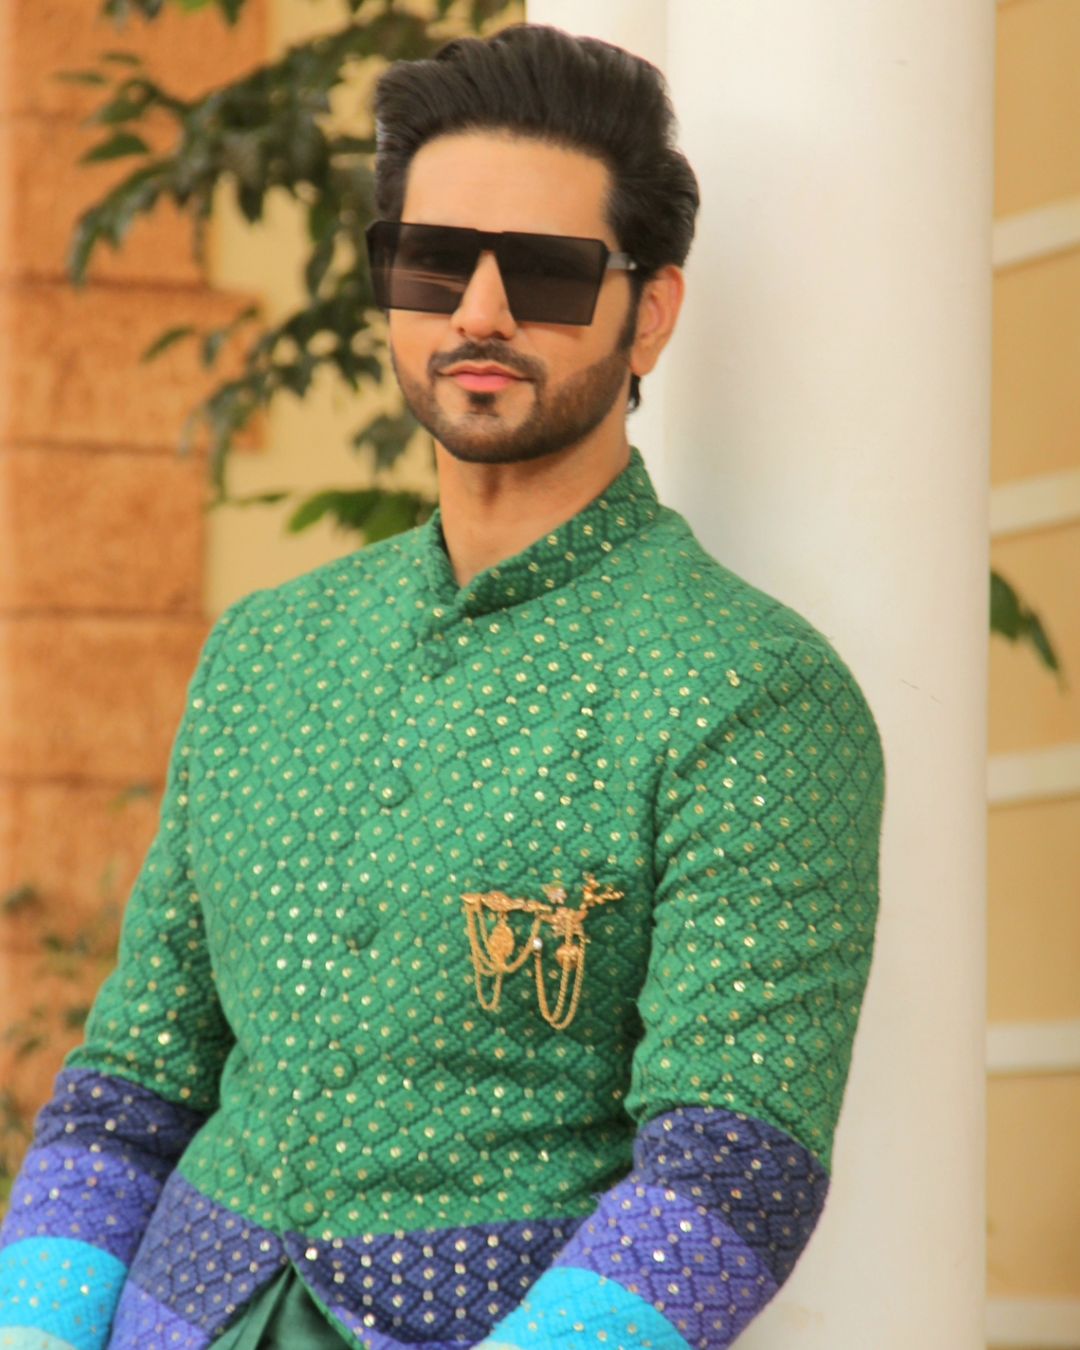 Ghum Hai Kisikey Pyaar Meiin's Shakti Arora Opens Up About His Fear Of Doing New Shows. Check Out More Details Here!